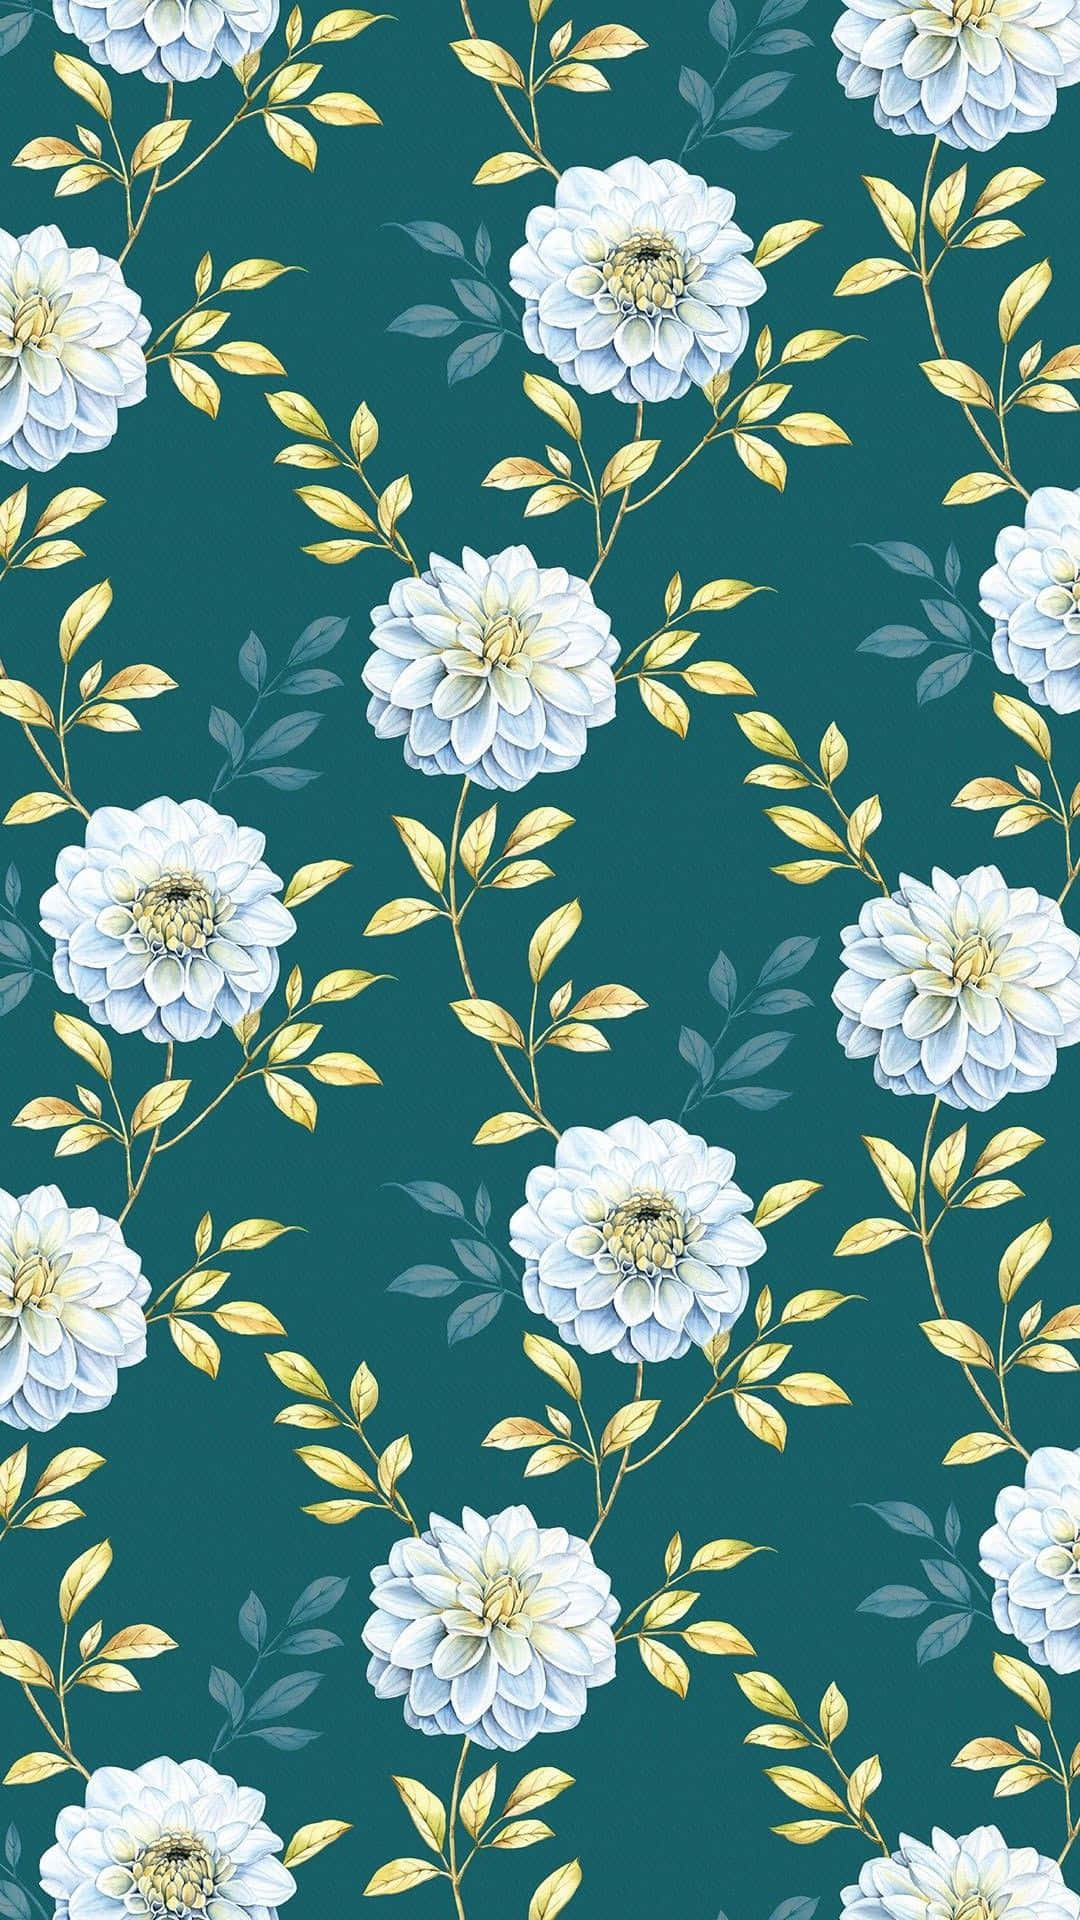 A Floral Pattern With White Flowers On A Teal Background Wallpaper